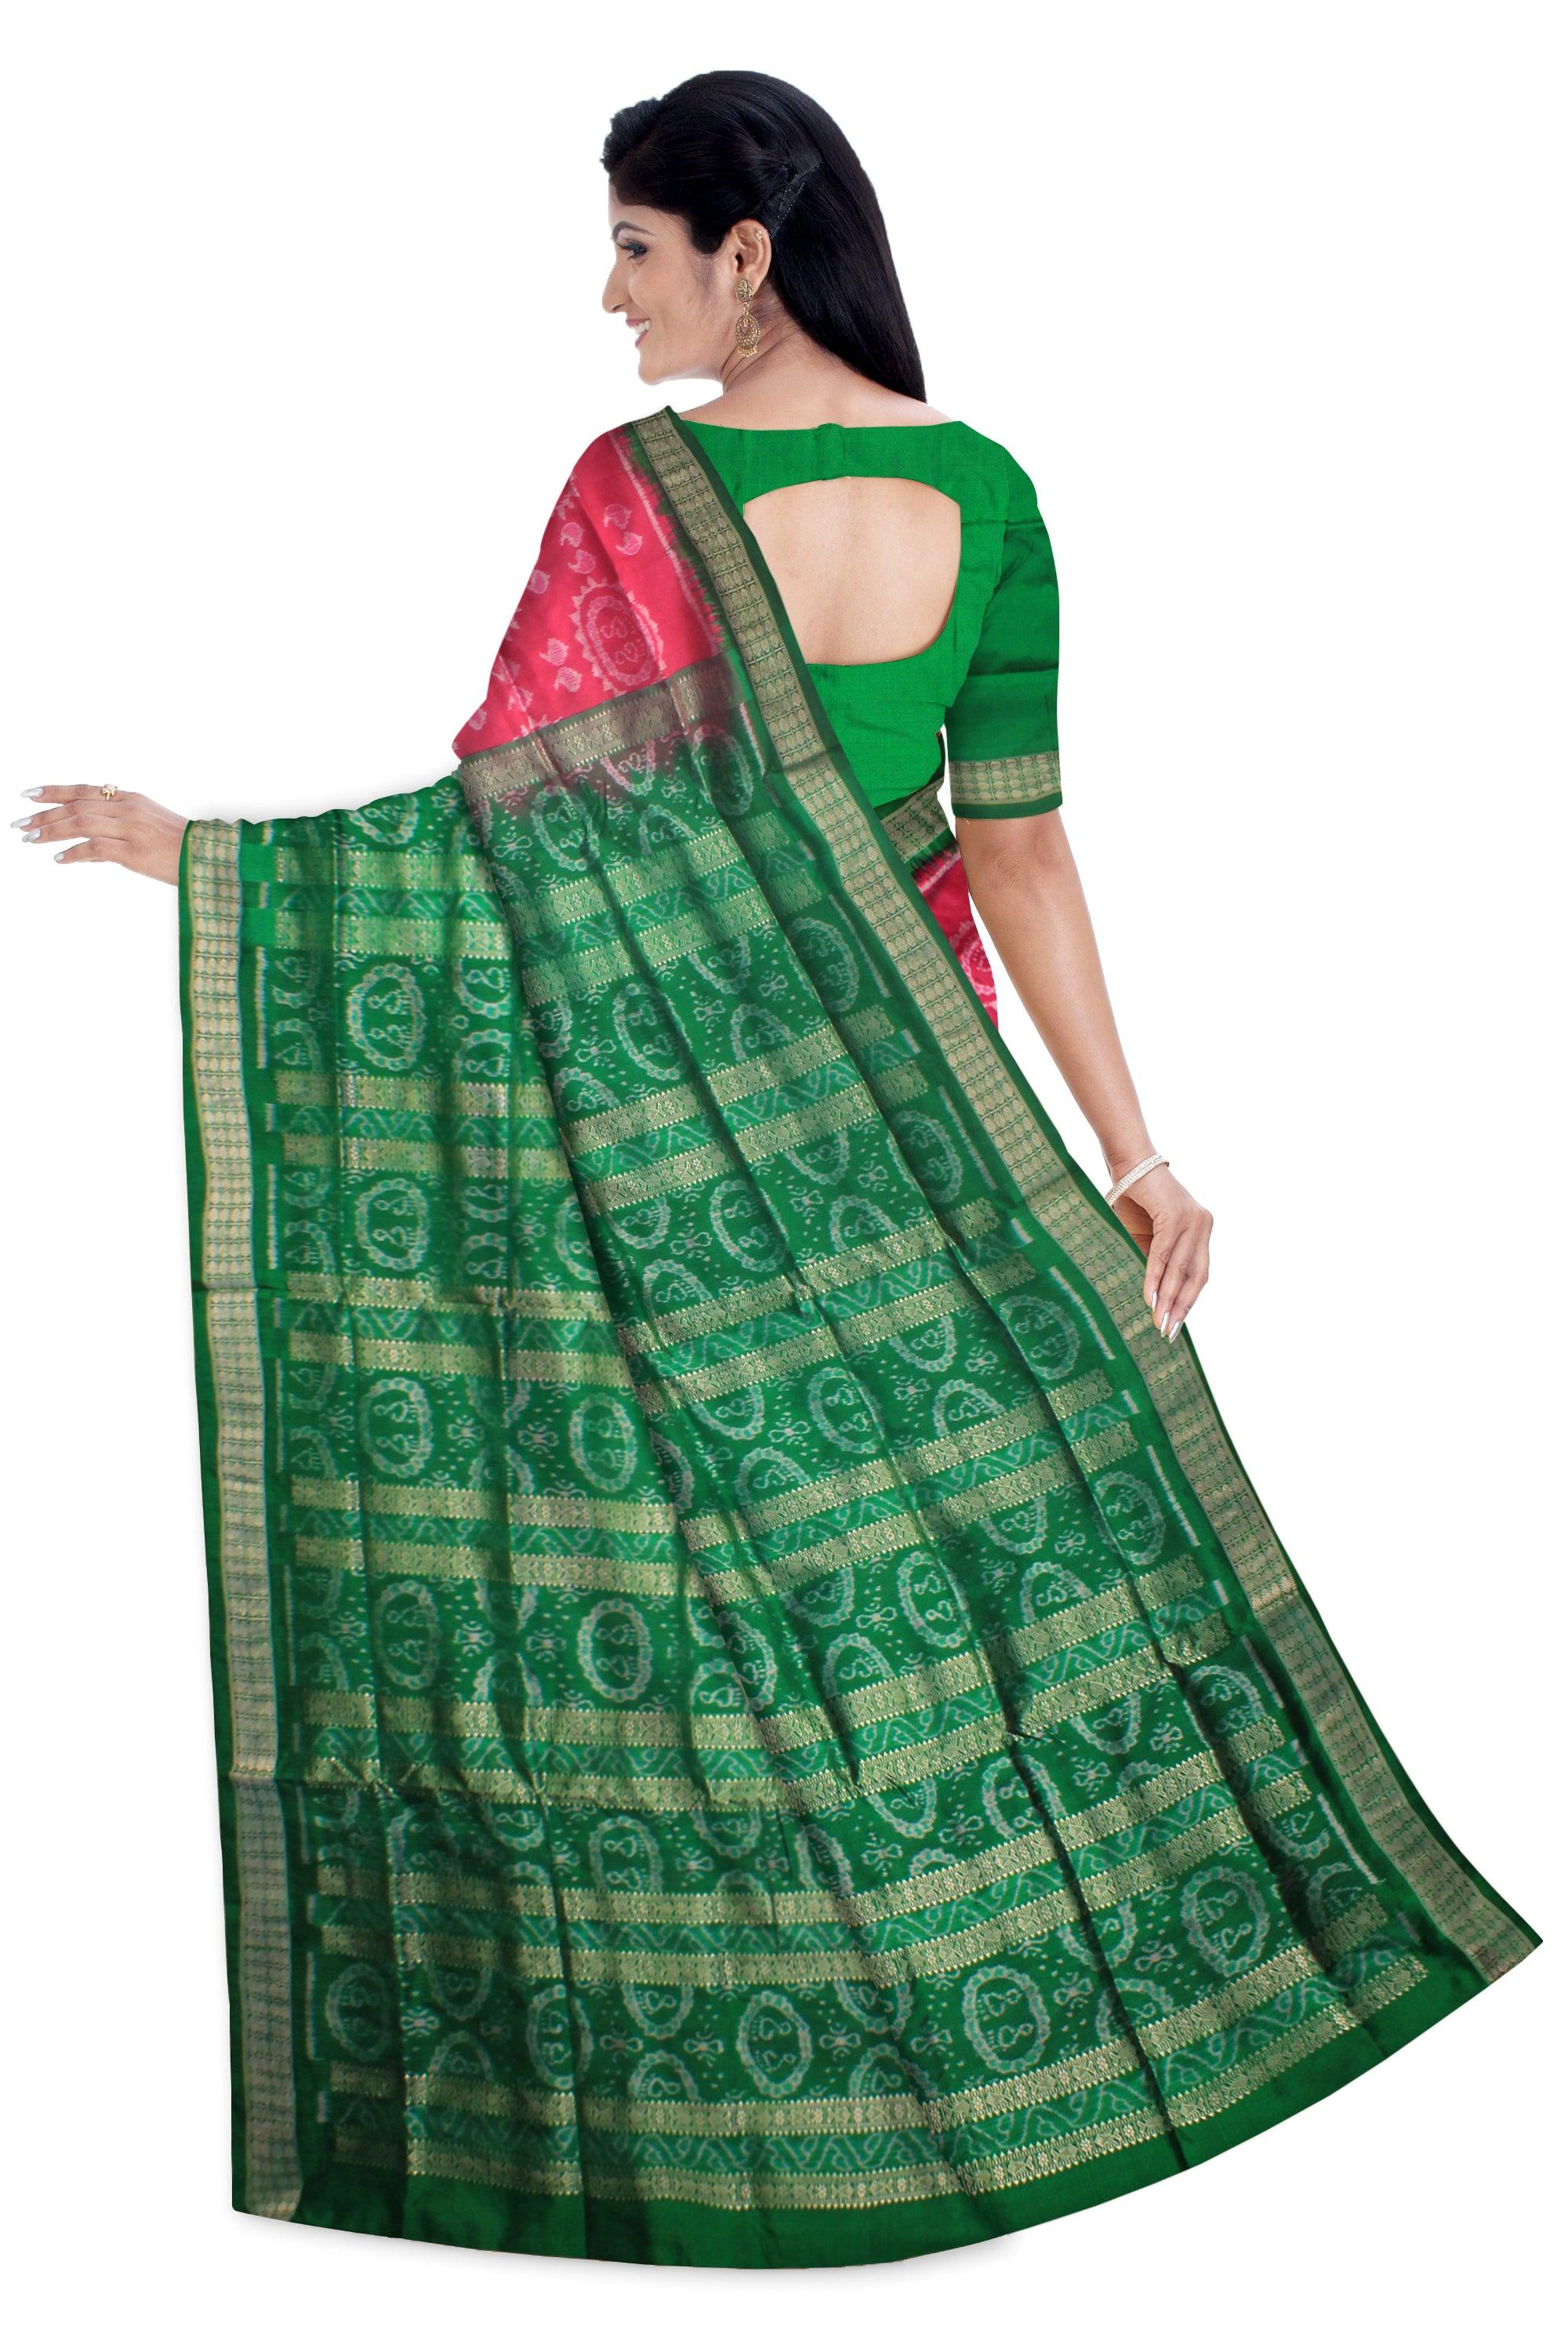 ROSE AND GREEN COLOR SONEPUR TRADITIONAL LAXMI DESIGNS PURE SILK SAREE, COMES WITH BLOUSE PIECE. - Koshali Arts & Crafts Enterprise